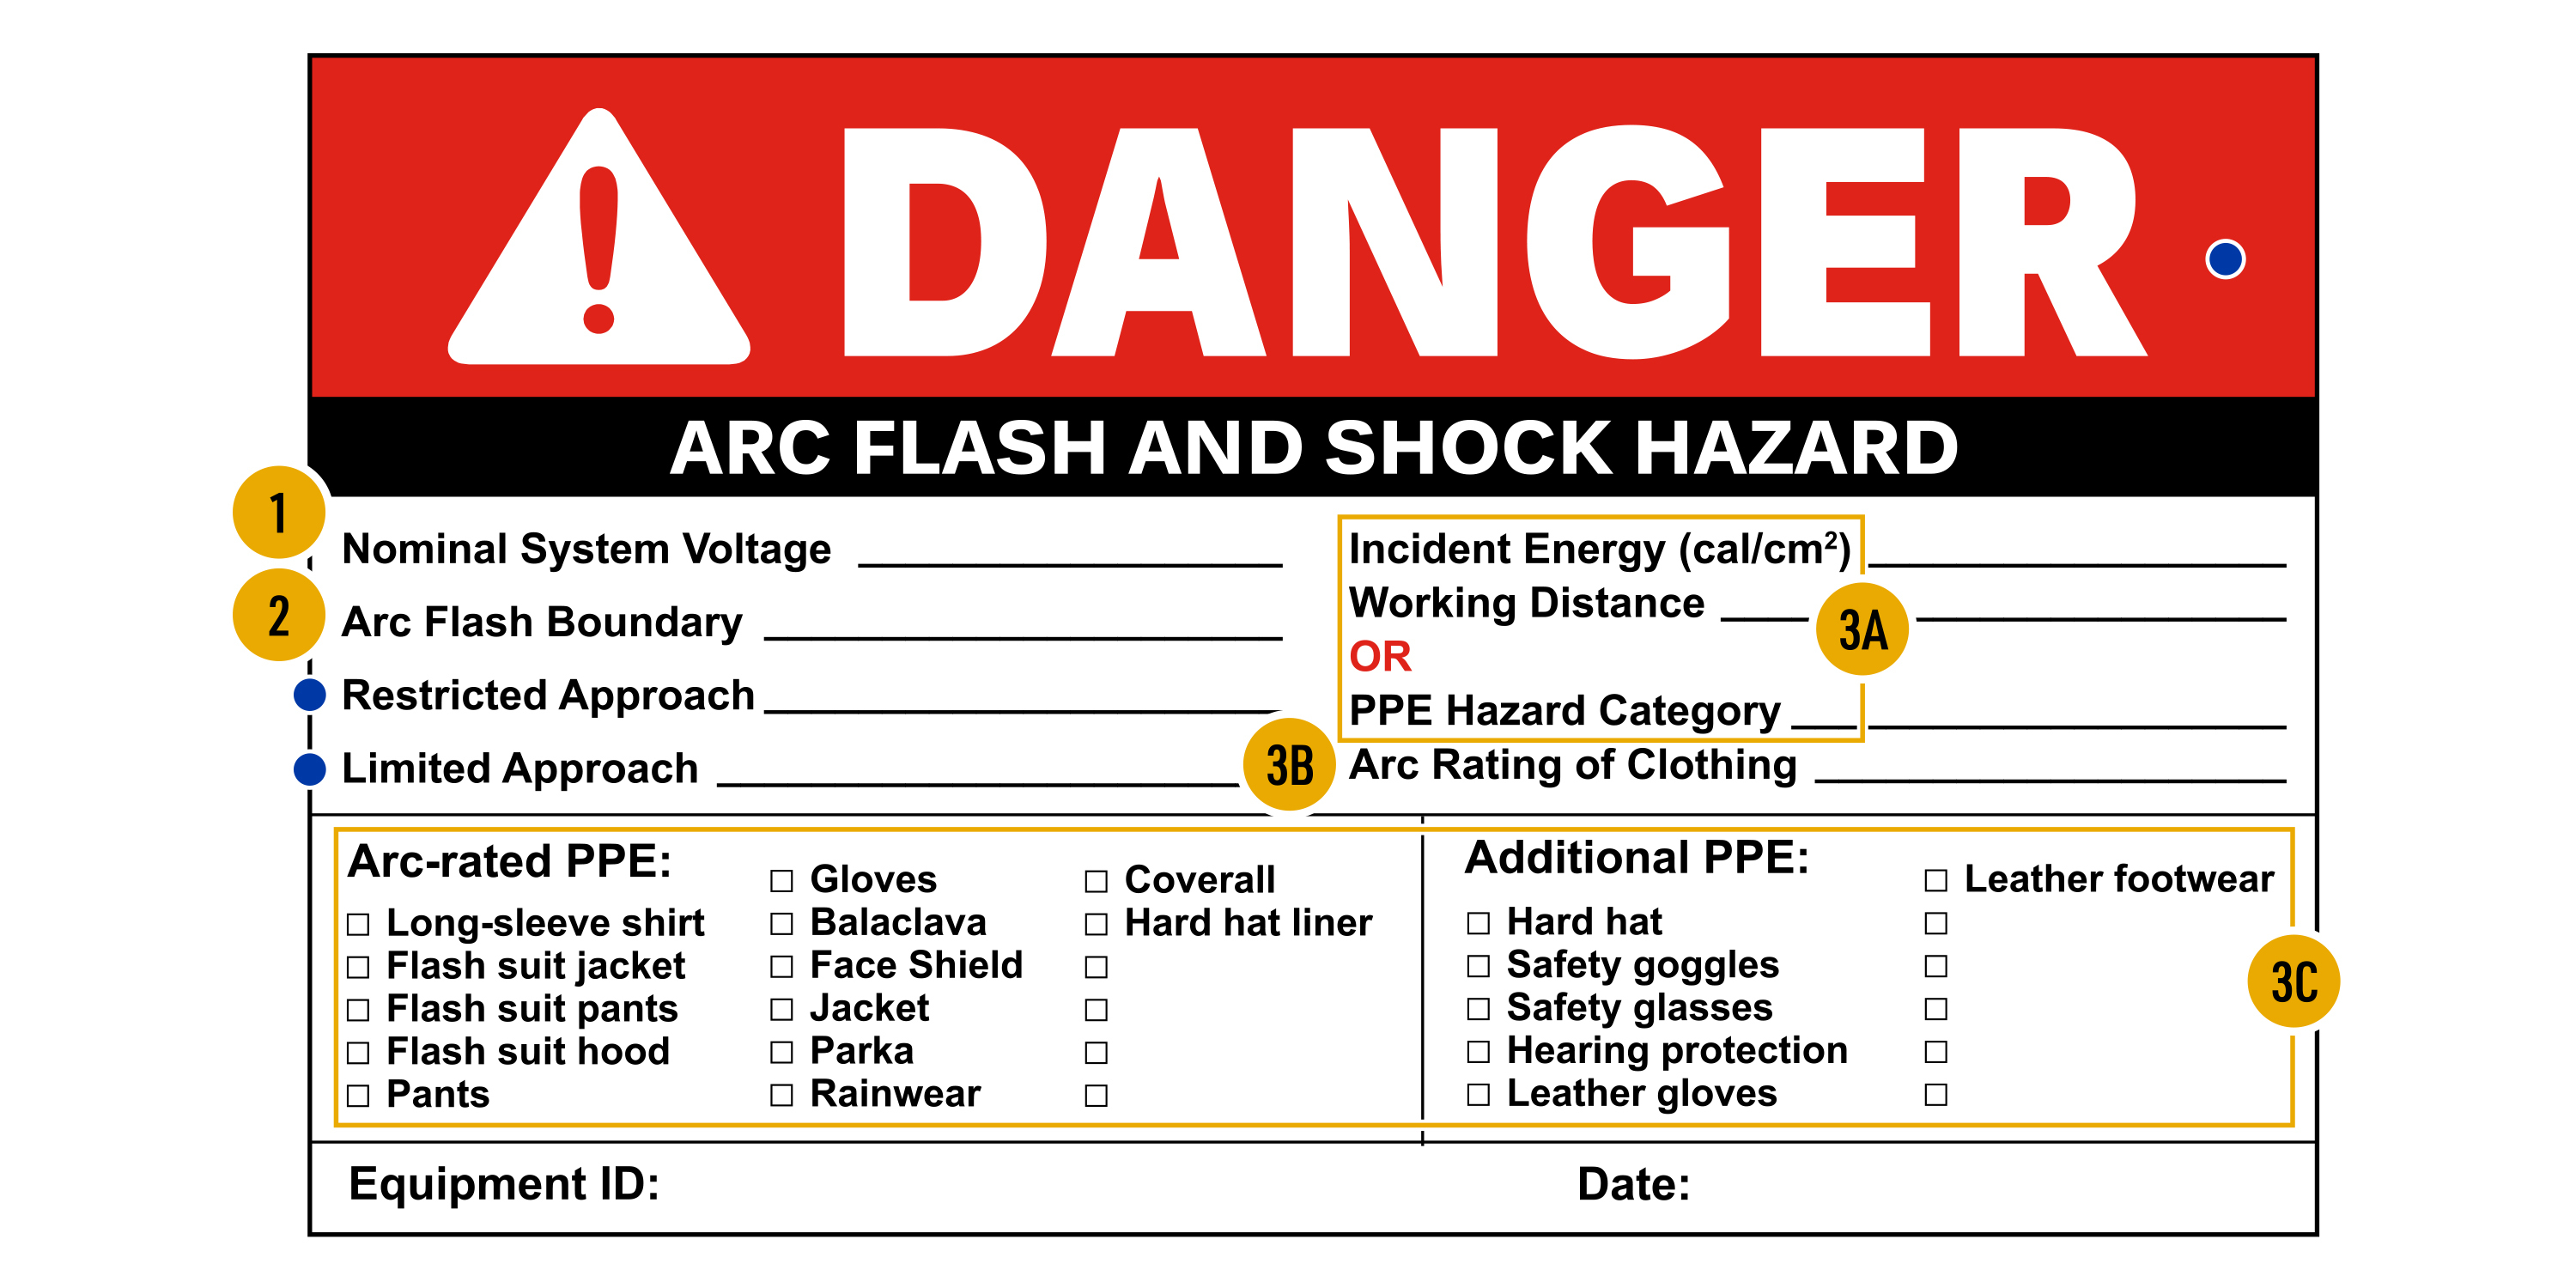 An example of an arc flash label that shows exactly what information should be on it. The NFPA 70E requirements are identified in the image with yellow number dots, while additional recommendations are highlighted with blue dots. The NFPA 70E requirements are nominal system voltage, arc flash boundary, incident energy & working distance or additional PPE requirements. OSHA/ANSI headers, restricted approach, and limited approach are indicated as additional recommendations.